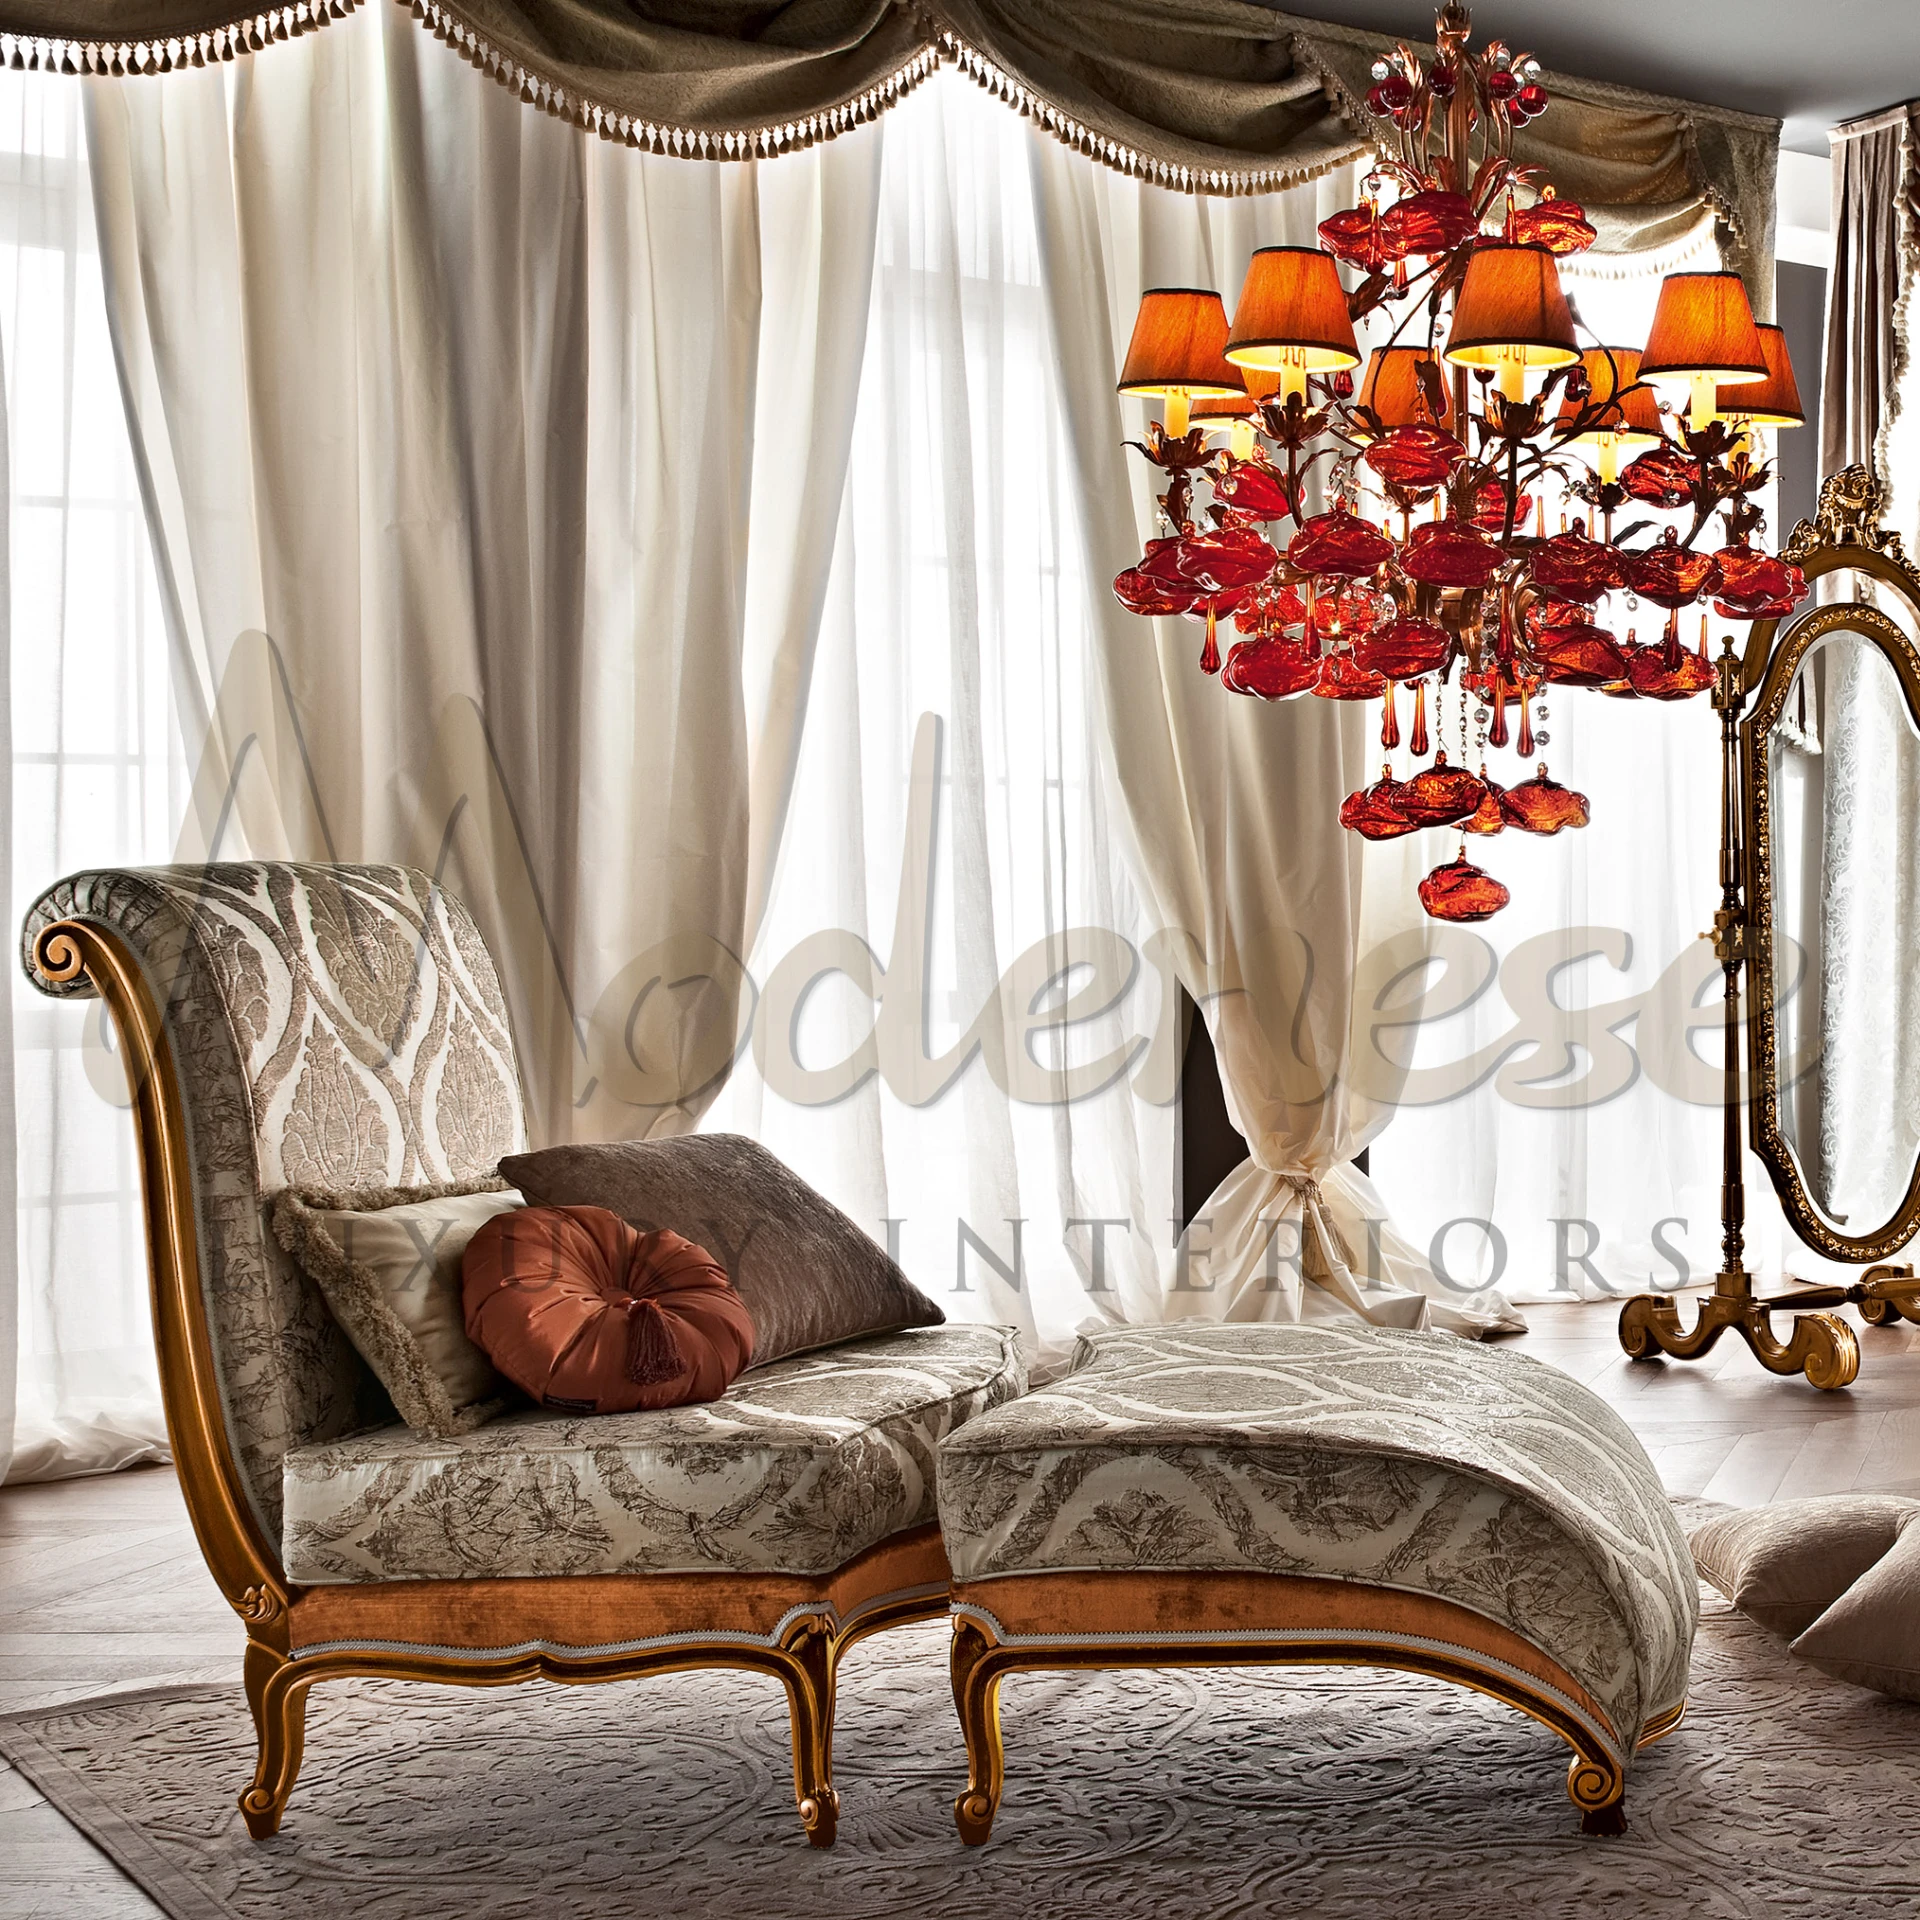 Classic upholstered chaise lounge with intricate wood carvings and elegant fabric design.                                                                       